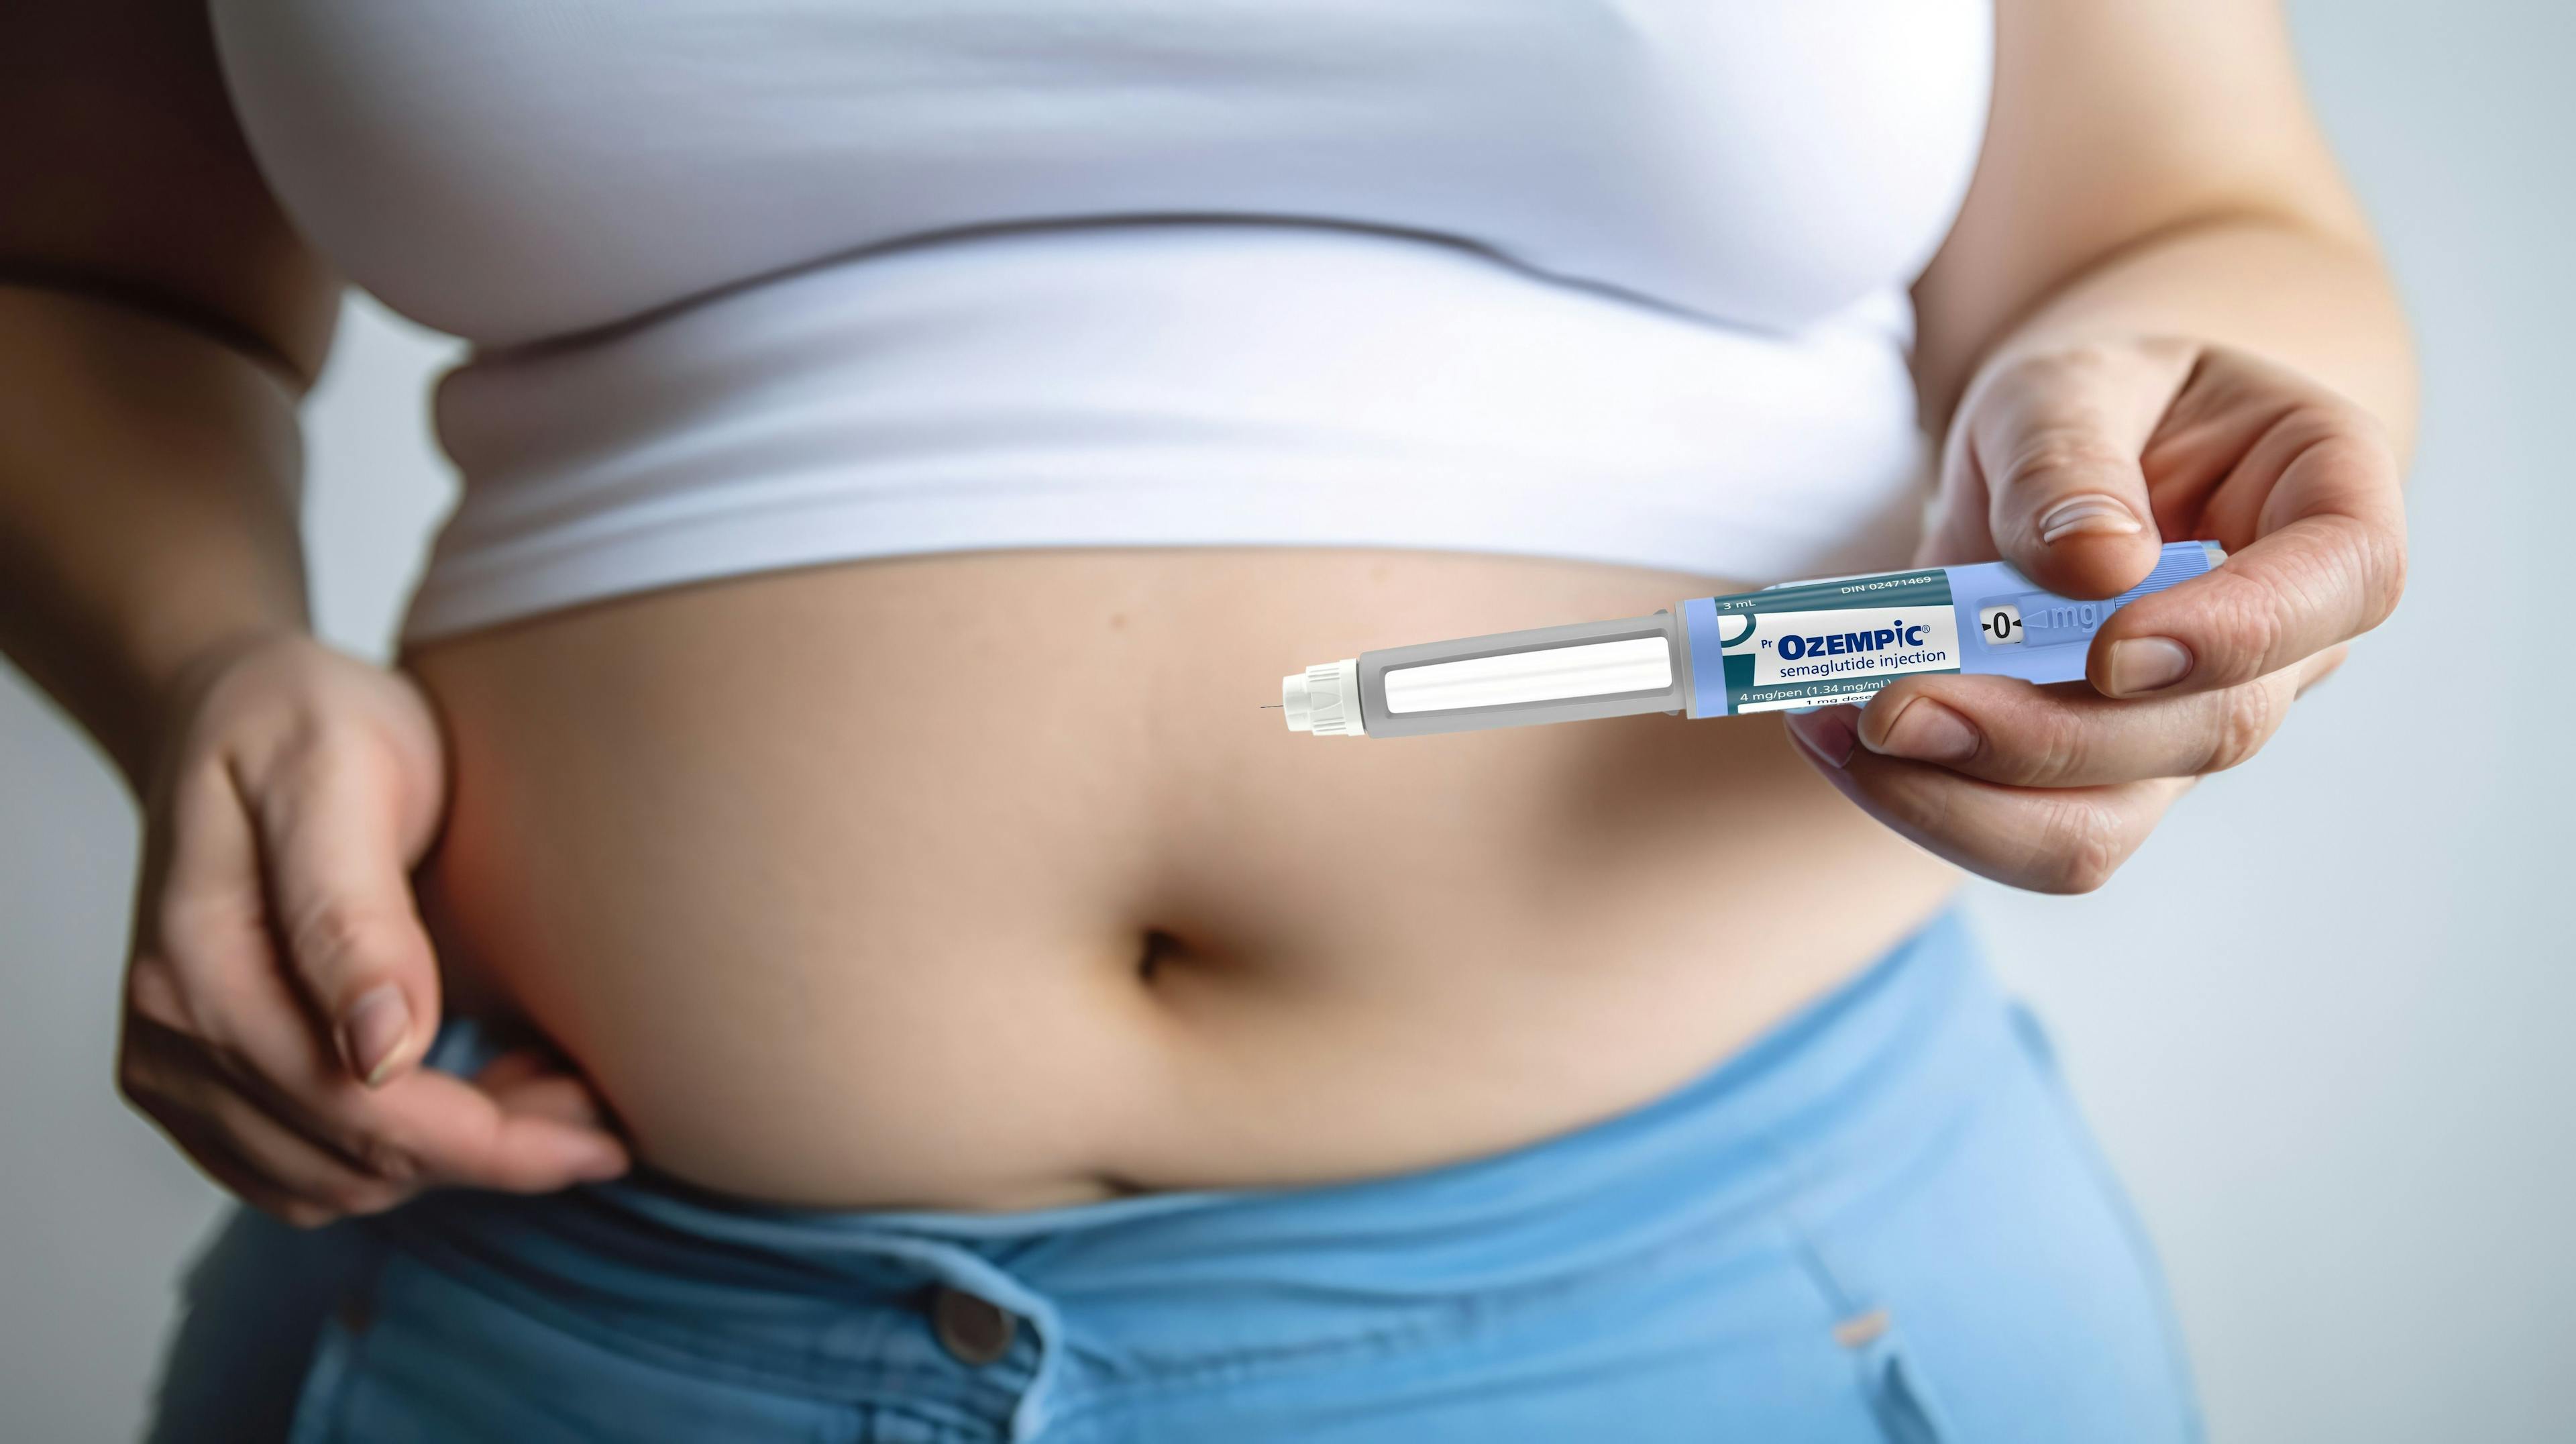 Ozempic Semaglutide Injection Diabetes Drug Being Used For Weight Loss. A Woman Holding an Ozempic Injection Pen in Front of Her Stomach.